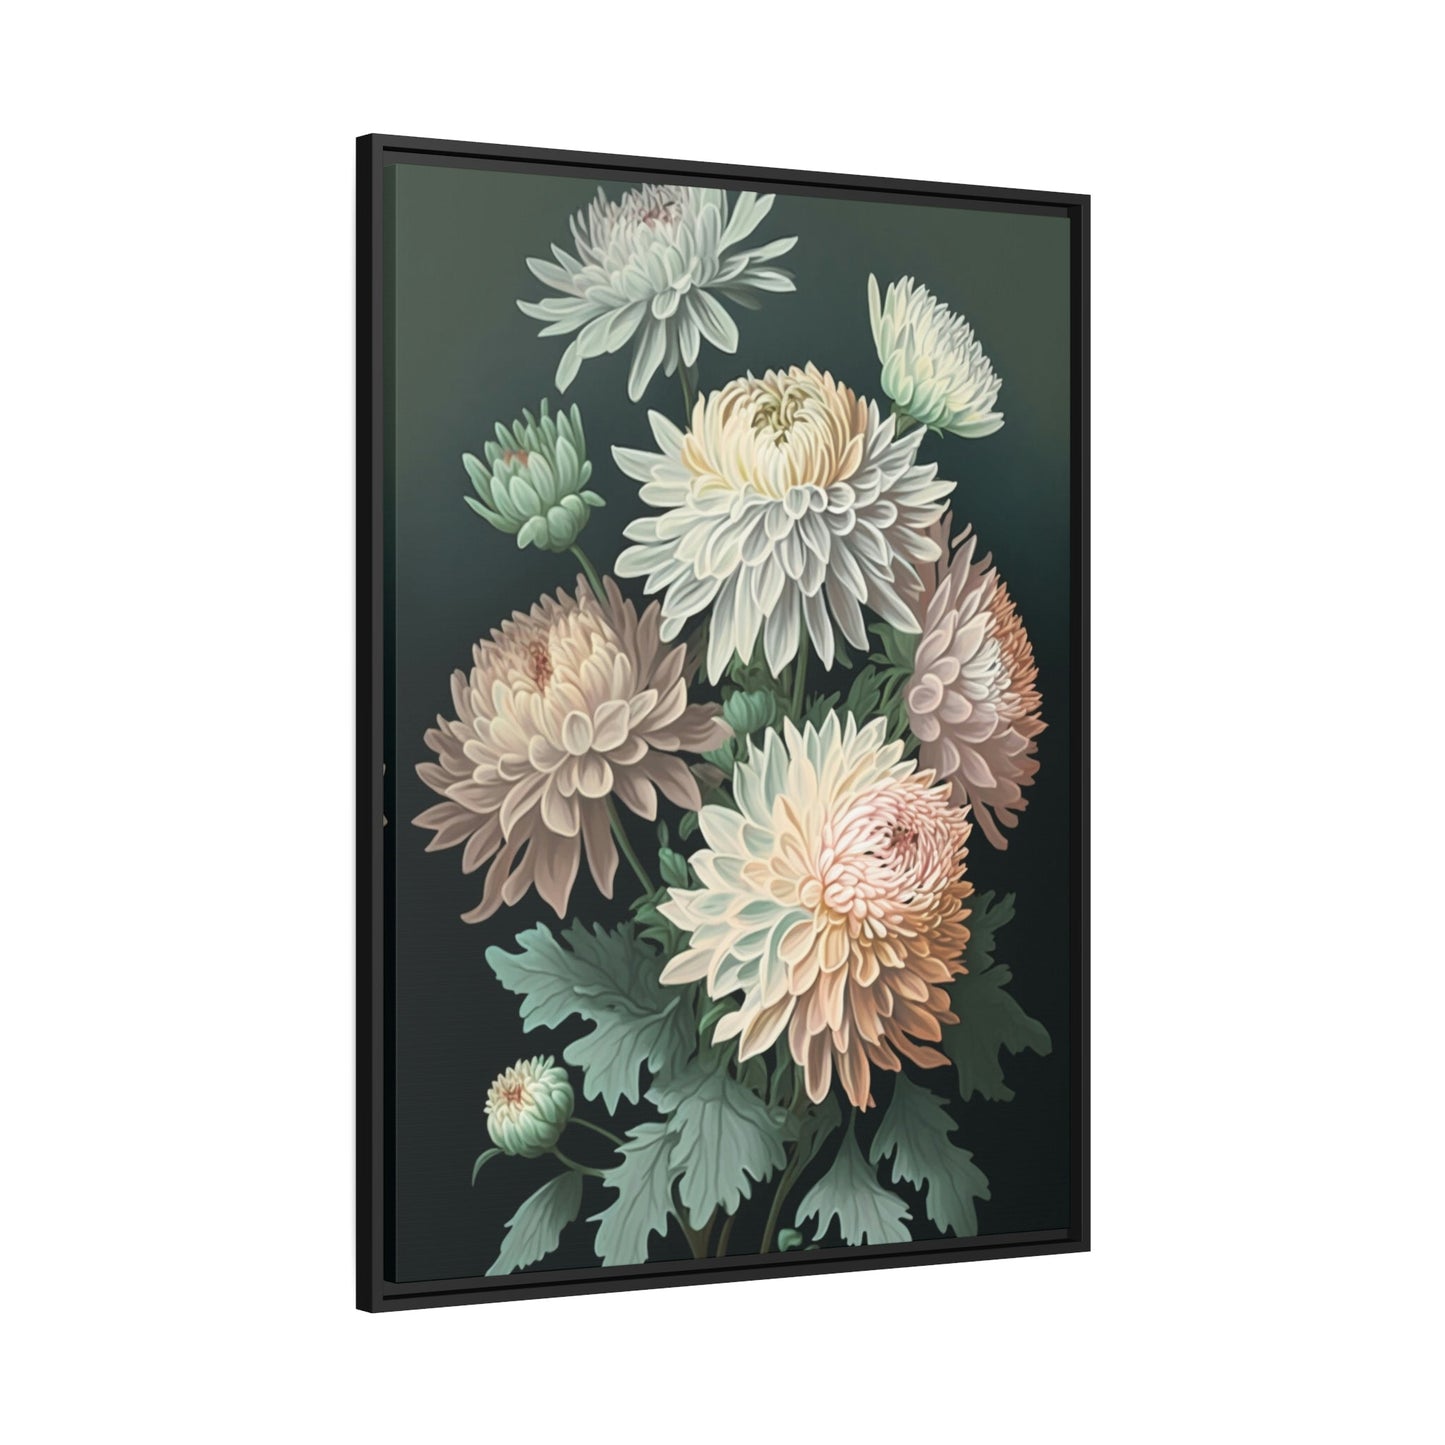 Chrysanthemums in Bloom: Beautiful Wall Art on Natural Canvas